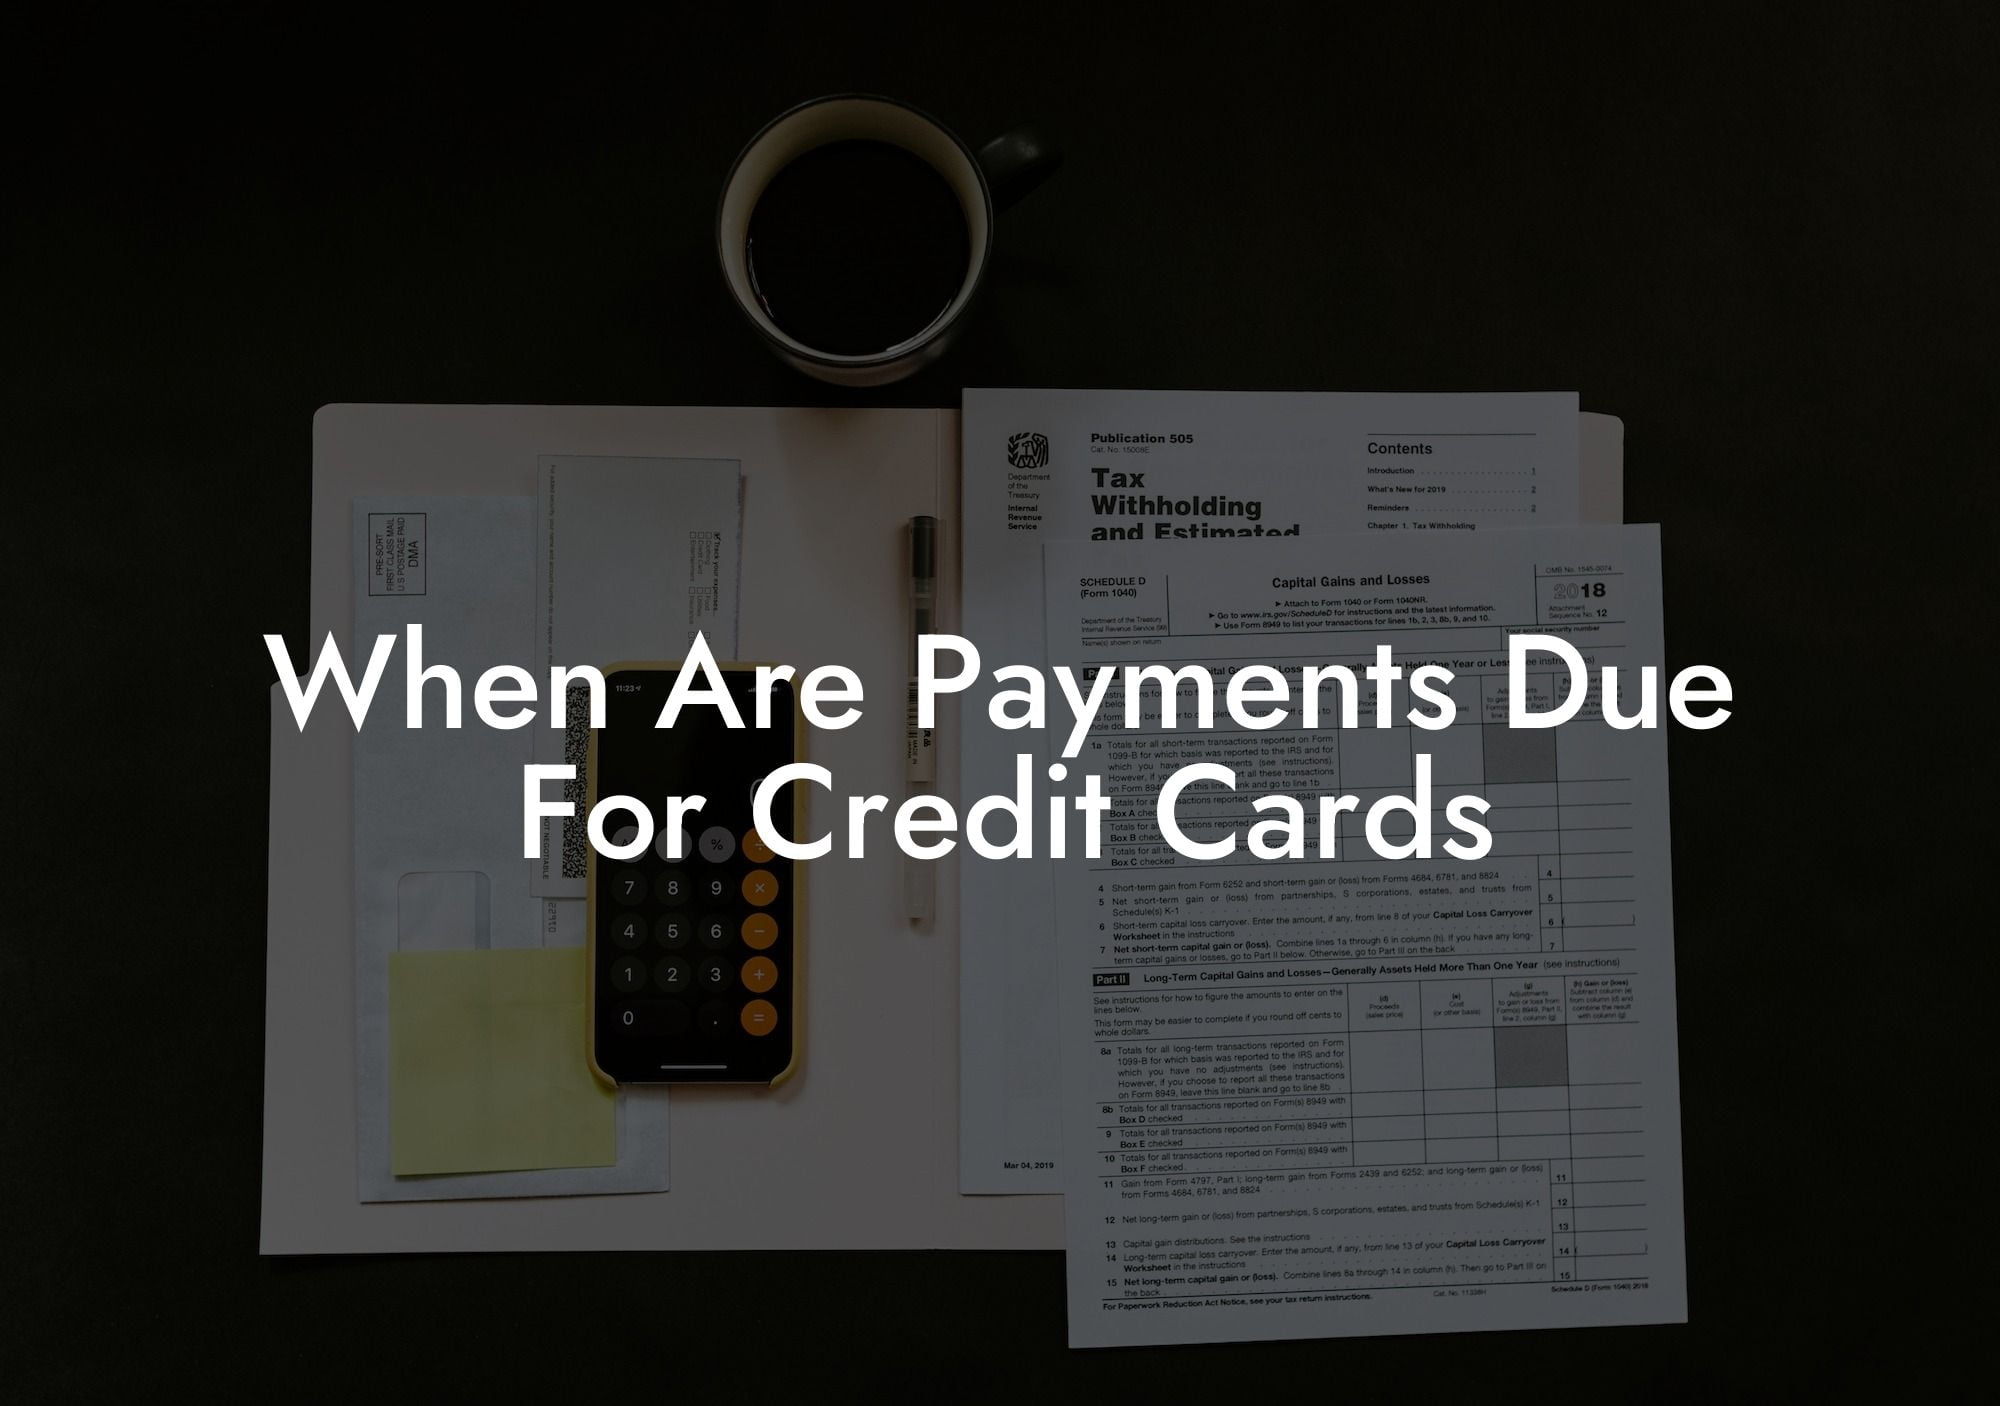 When Are Payments Due For Credit Cards